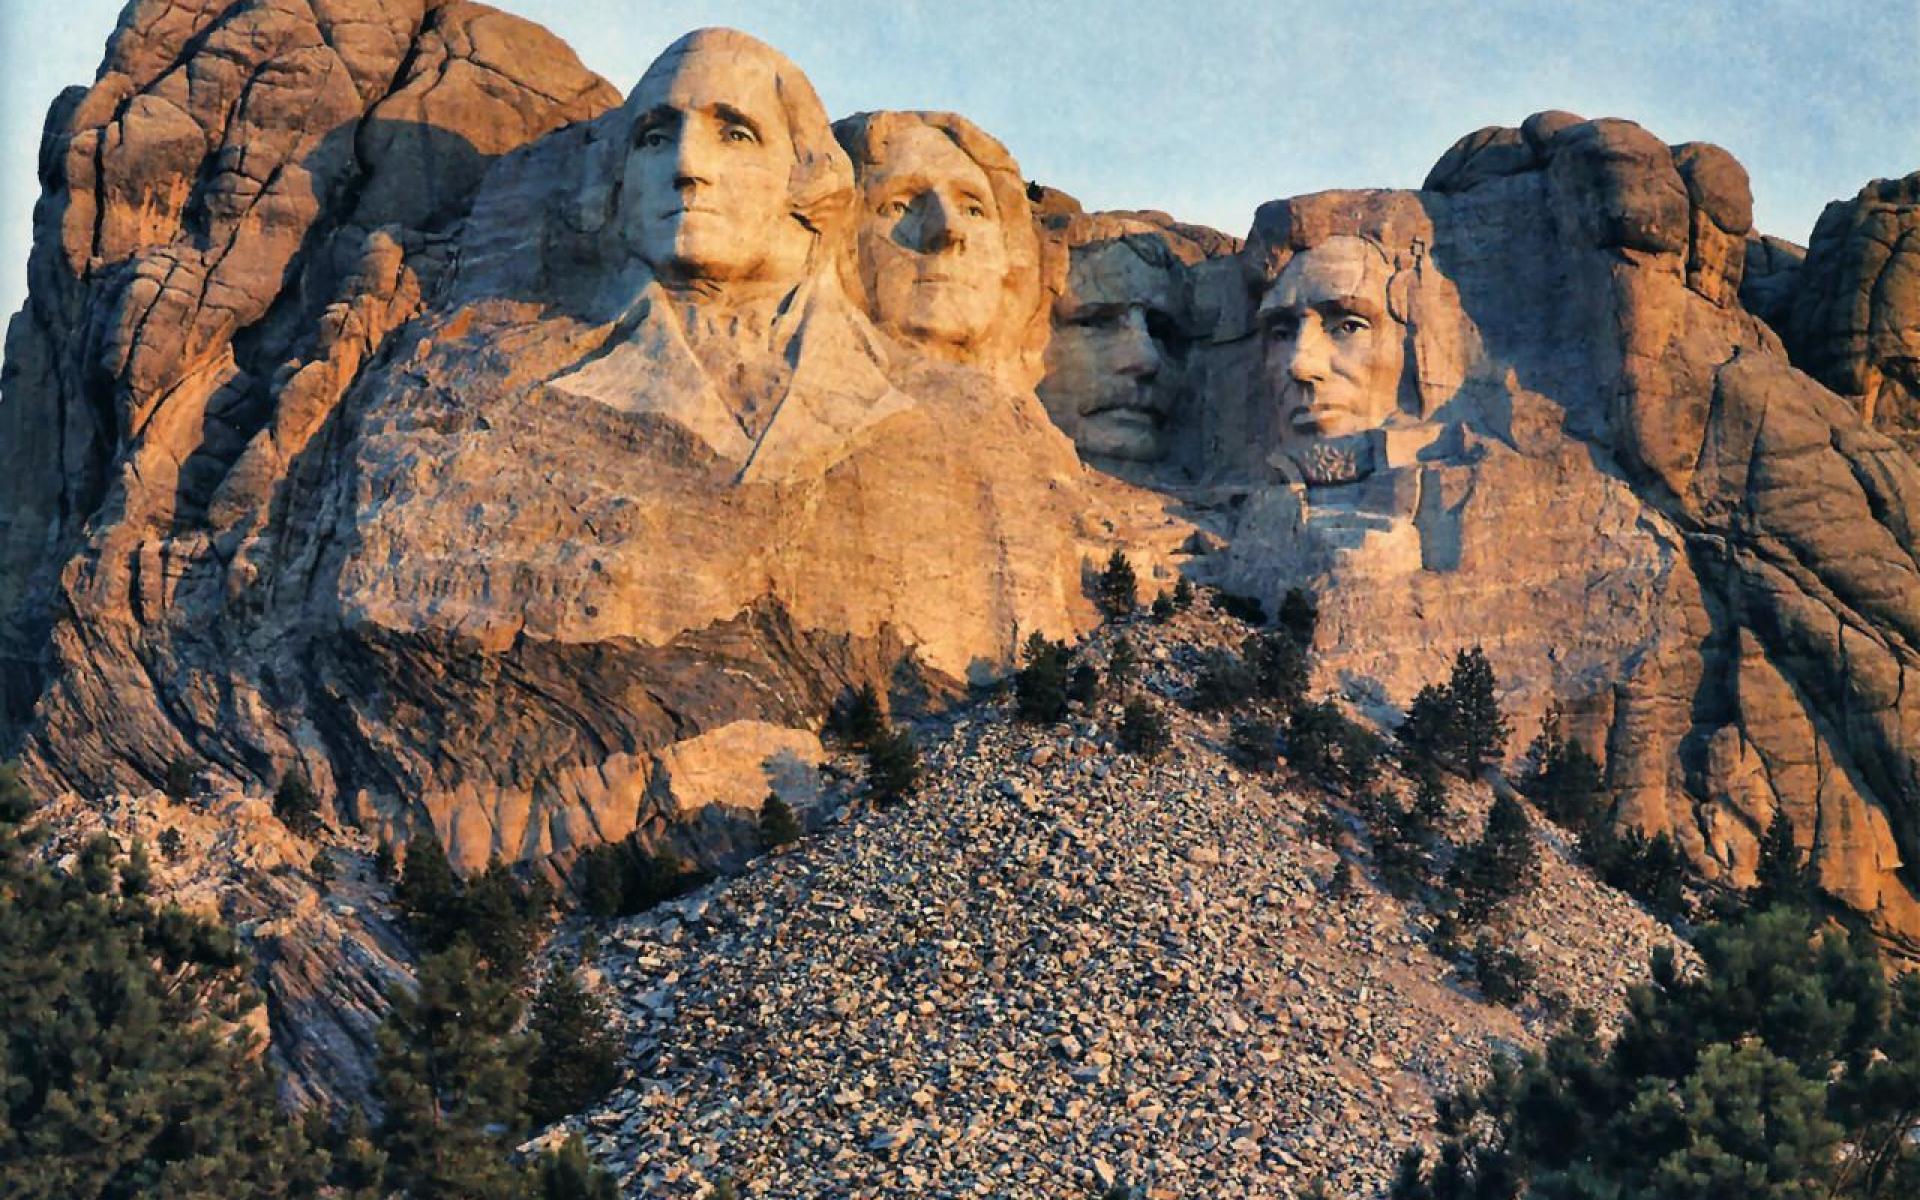 Mount Rushmore Photo by Eugenio Cerman on GoldWallpaper